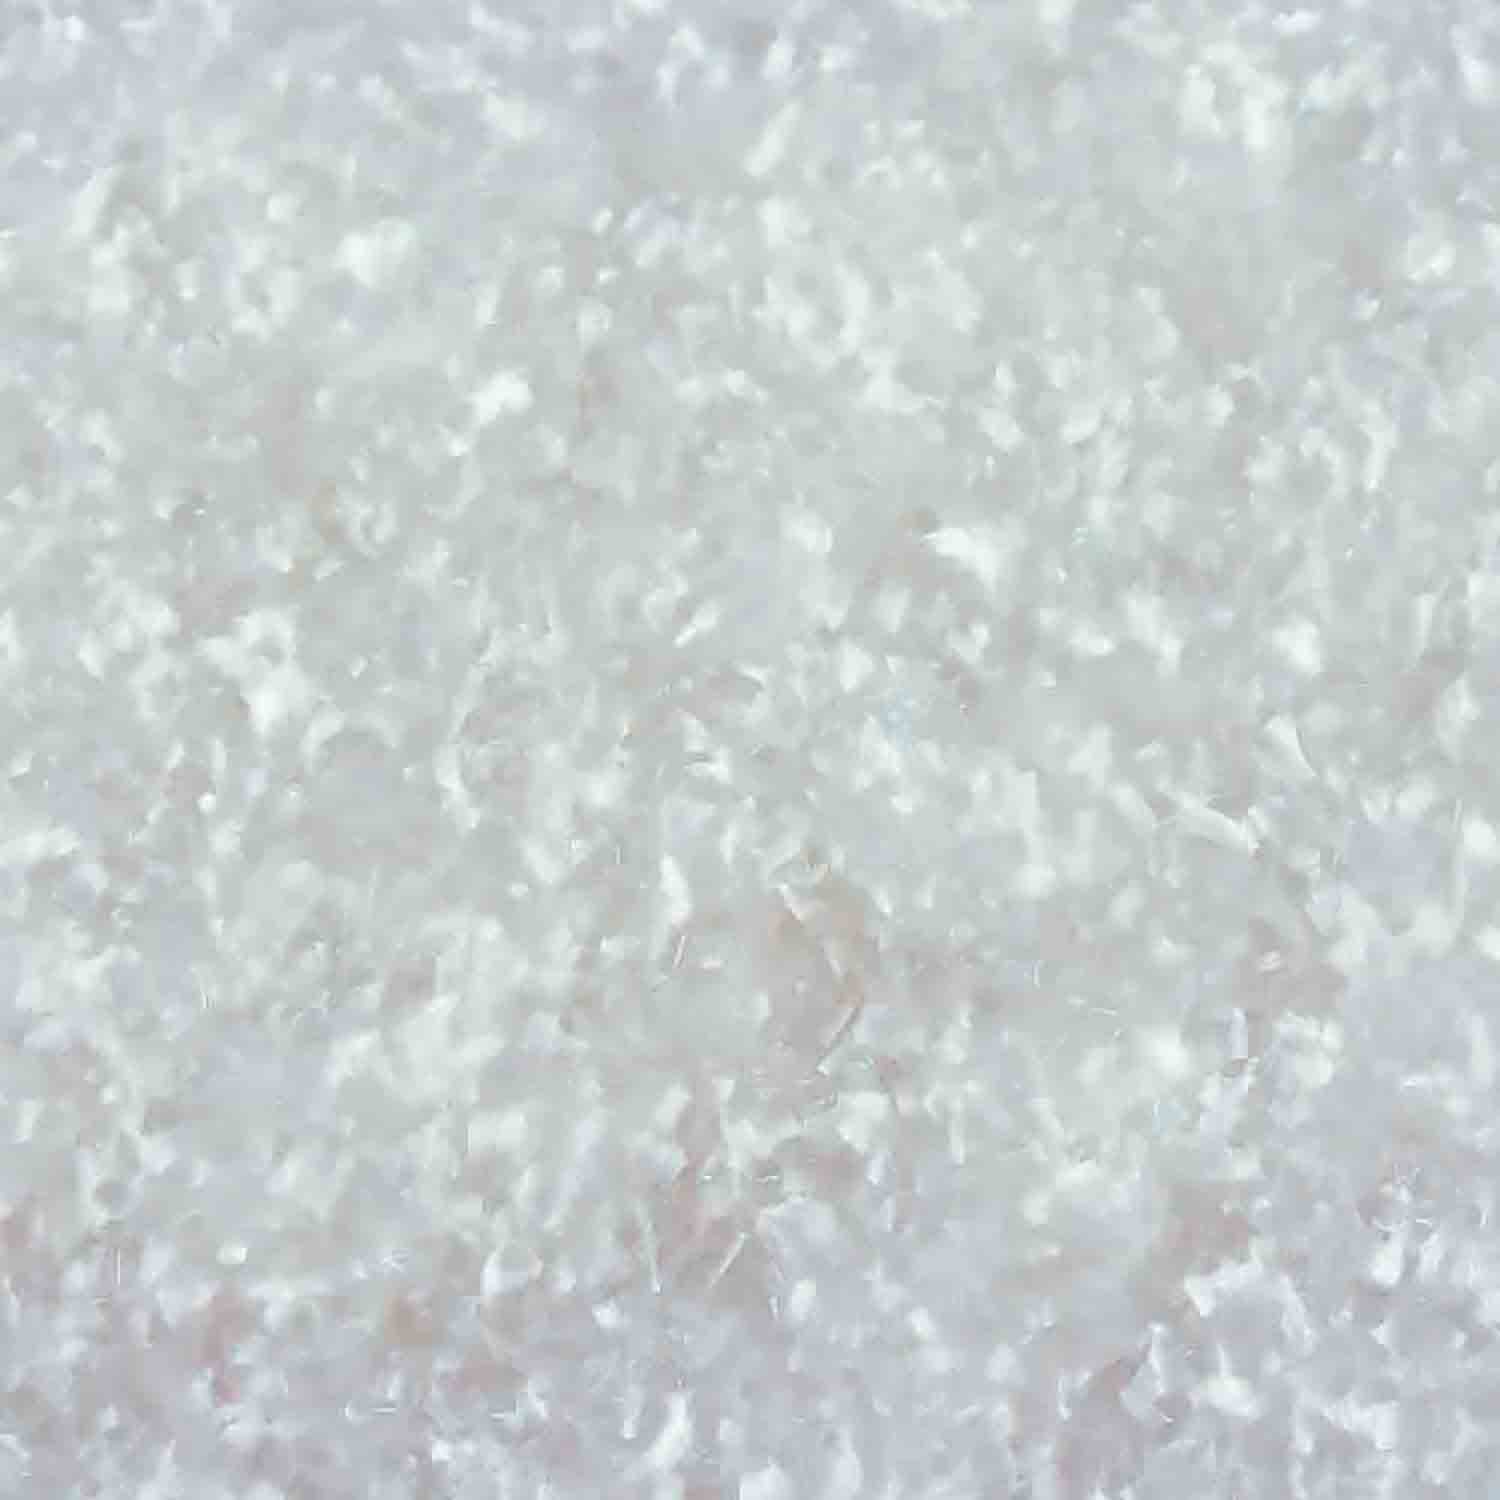 White Edible Glitter Flakes - Bakery Crafts